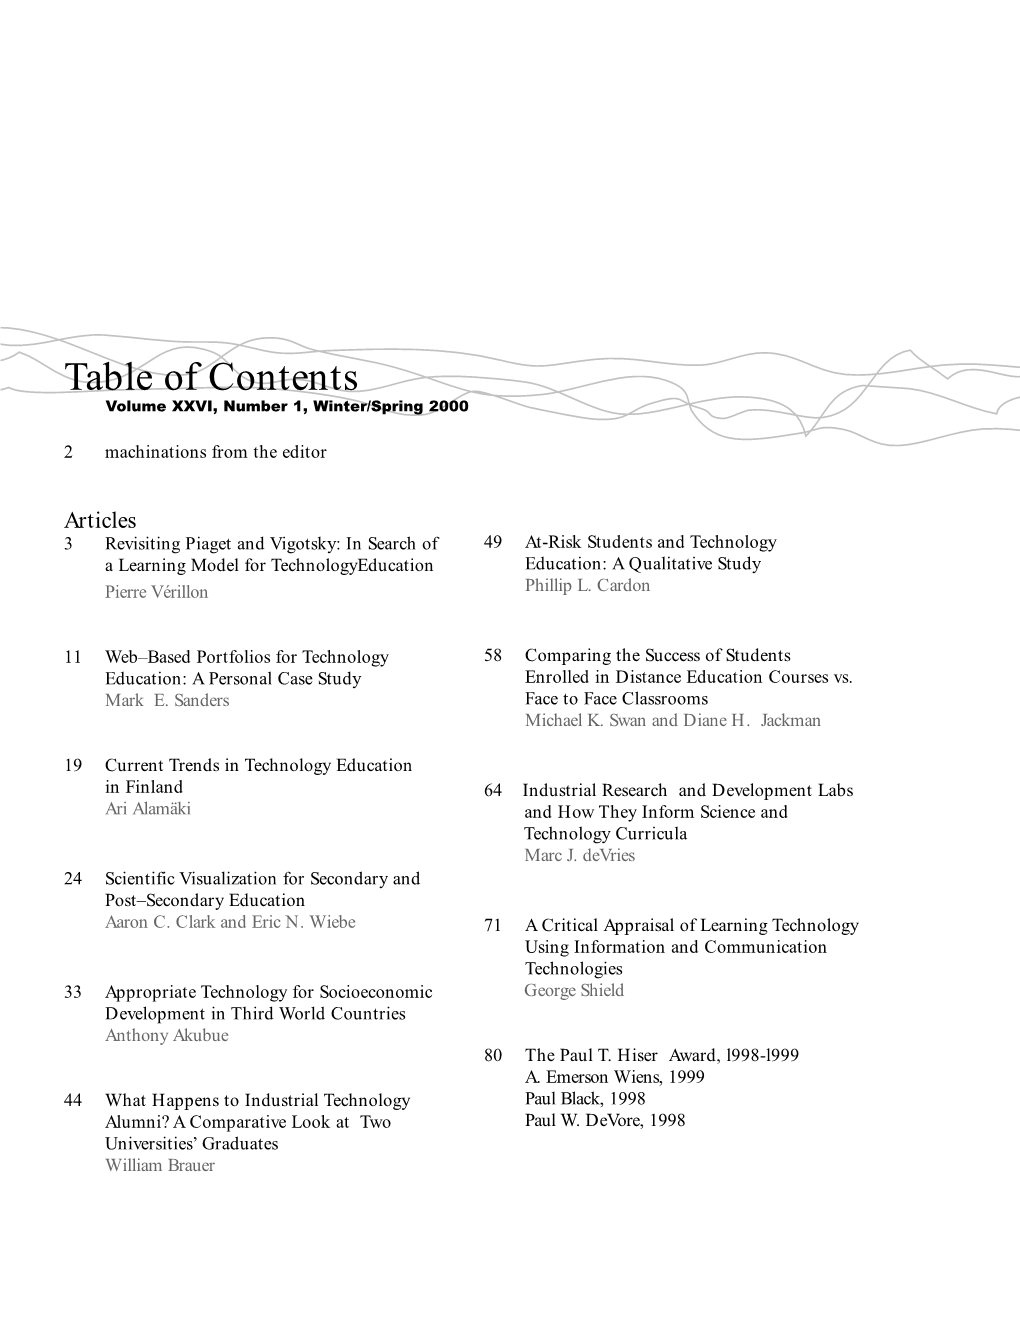 Table of Contents Volume XXVI, Number 1, Winter/Spring 2000